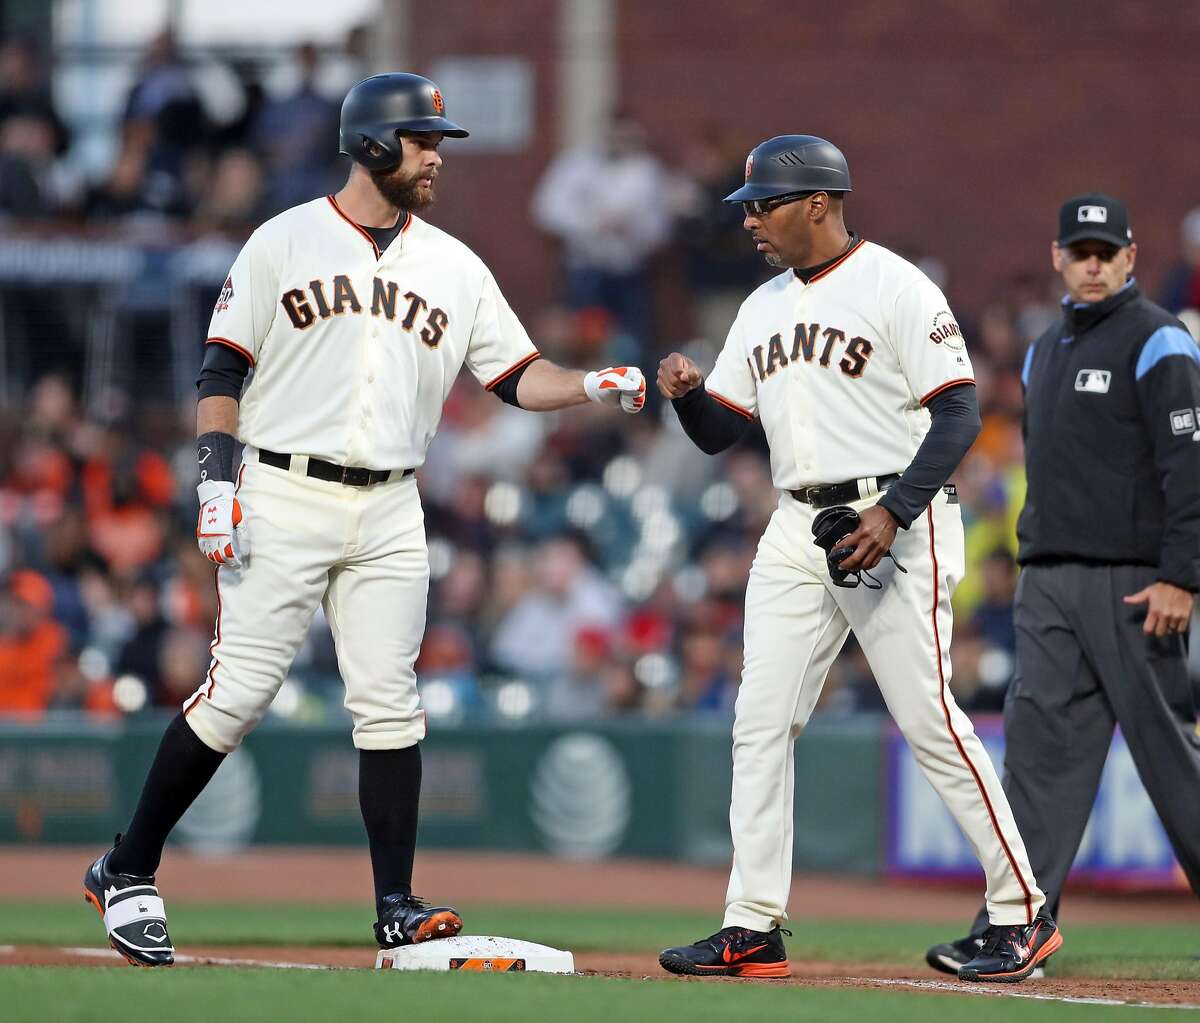 San Francisco Giants' first base coach Roberto Kelly fist bumps Brandon Belt after Belt's 4th inning single against Miami Marlins during MLB game at AT&T Park in San Francisco, Calif. on Monday, June18, 2018.